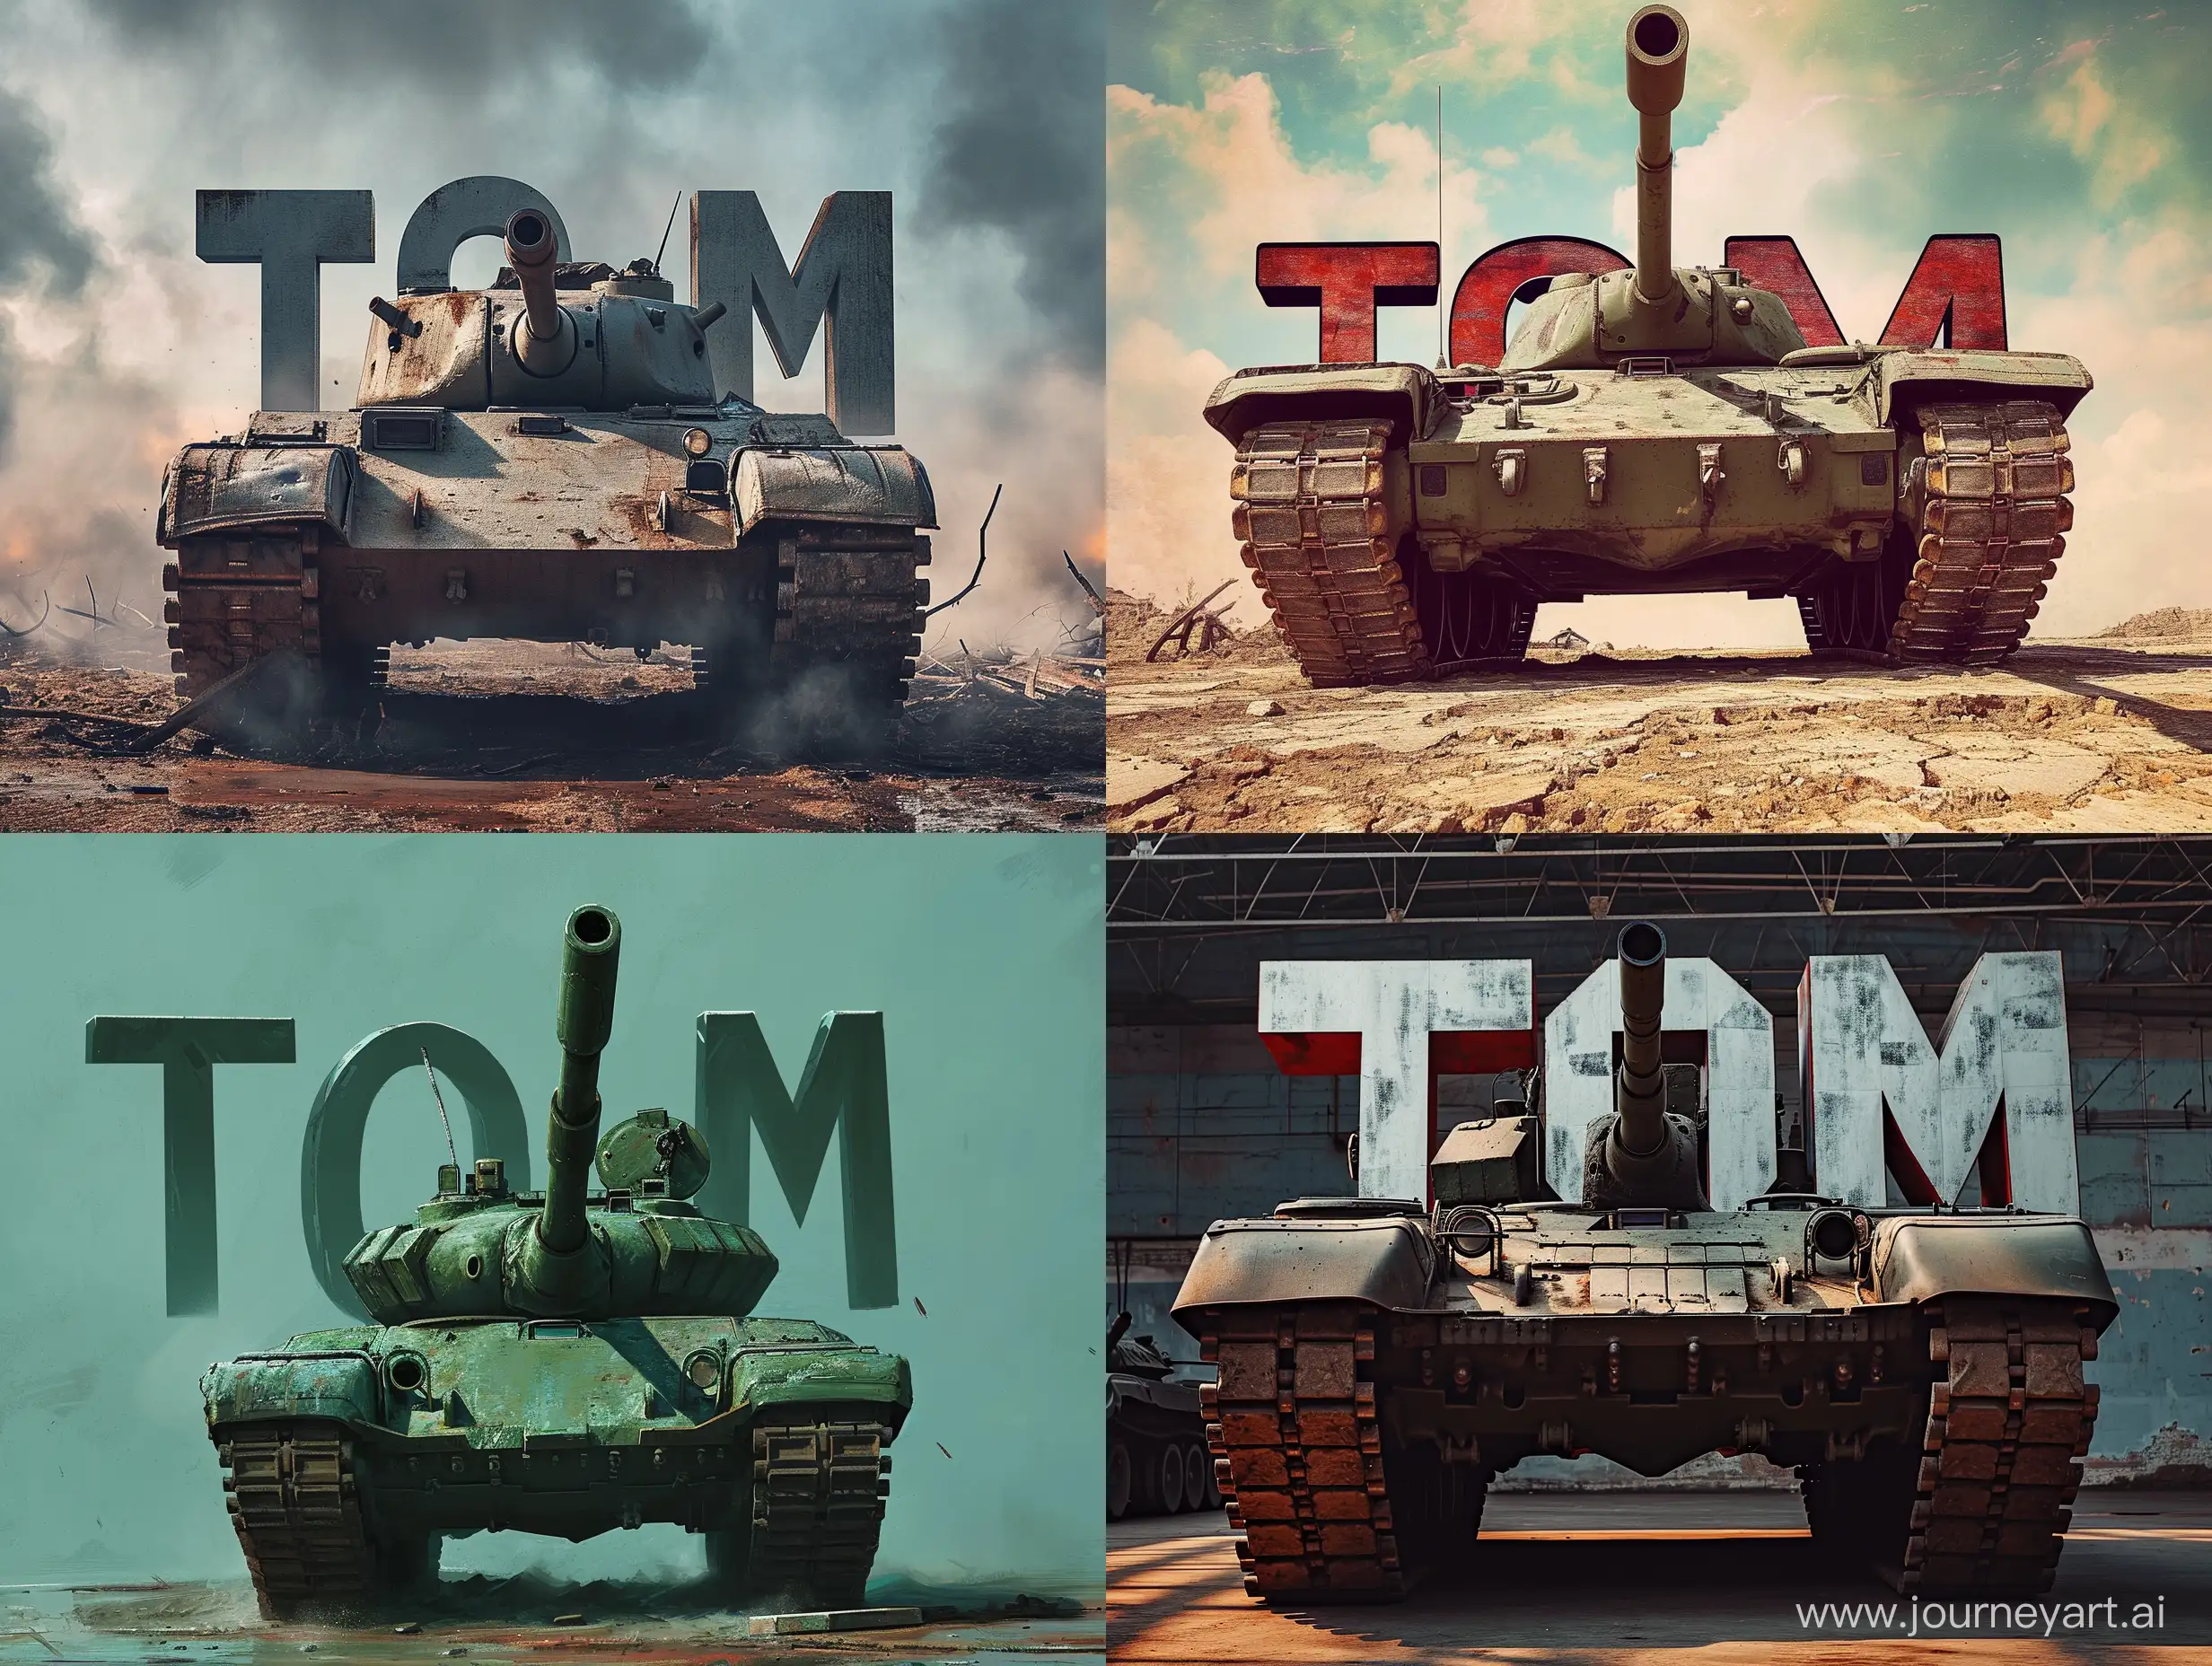 Powerful-Tank-Display-with-Bold-TOM-Letters-in-43-Aspect-Ratio